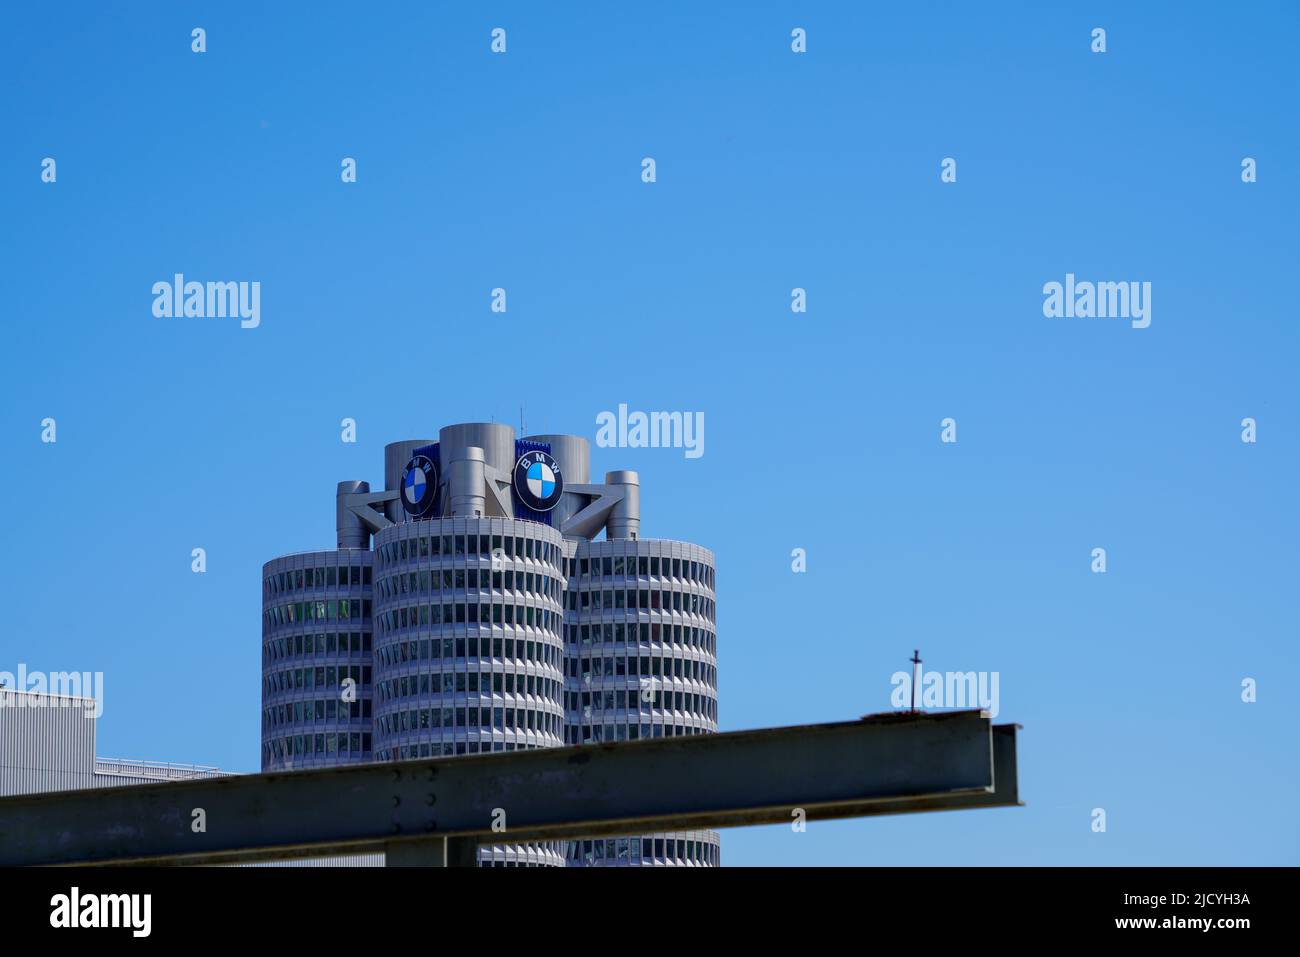 The BMW Tower, the BMW four-cylinder is the main administration building and landmark of the car manufacturer BMW in Munich, Germany, 15.5.22 Stock Photo